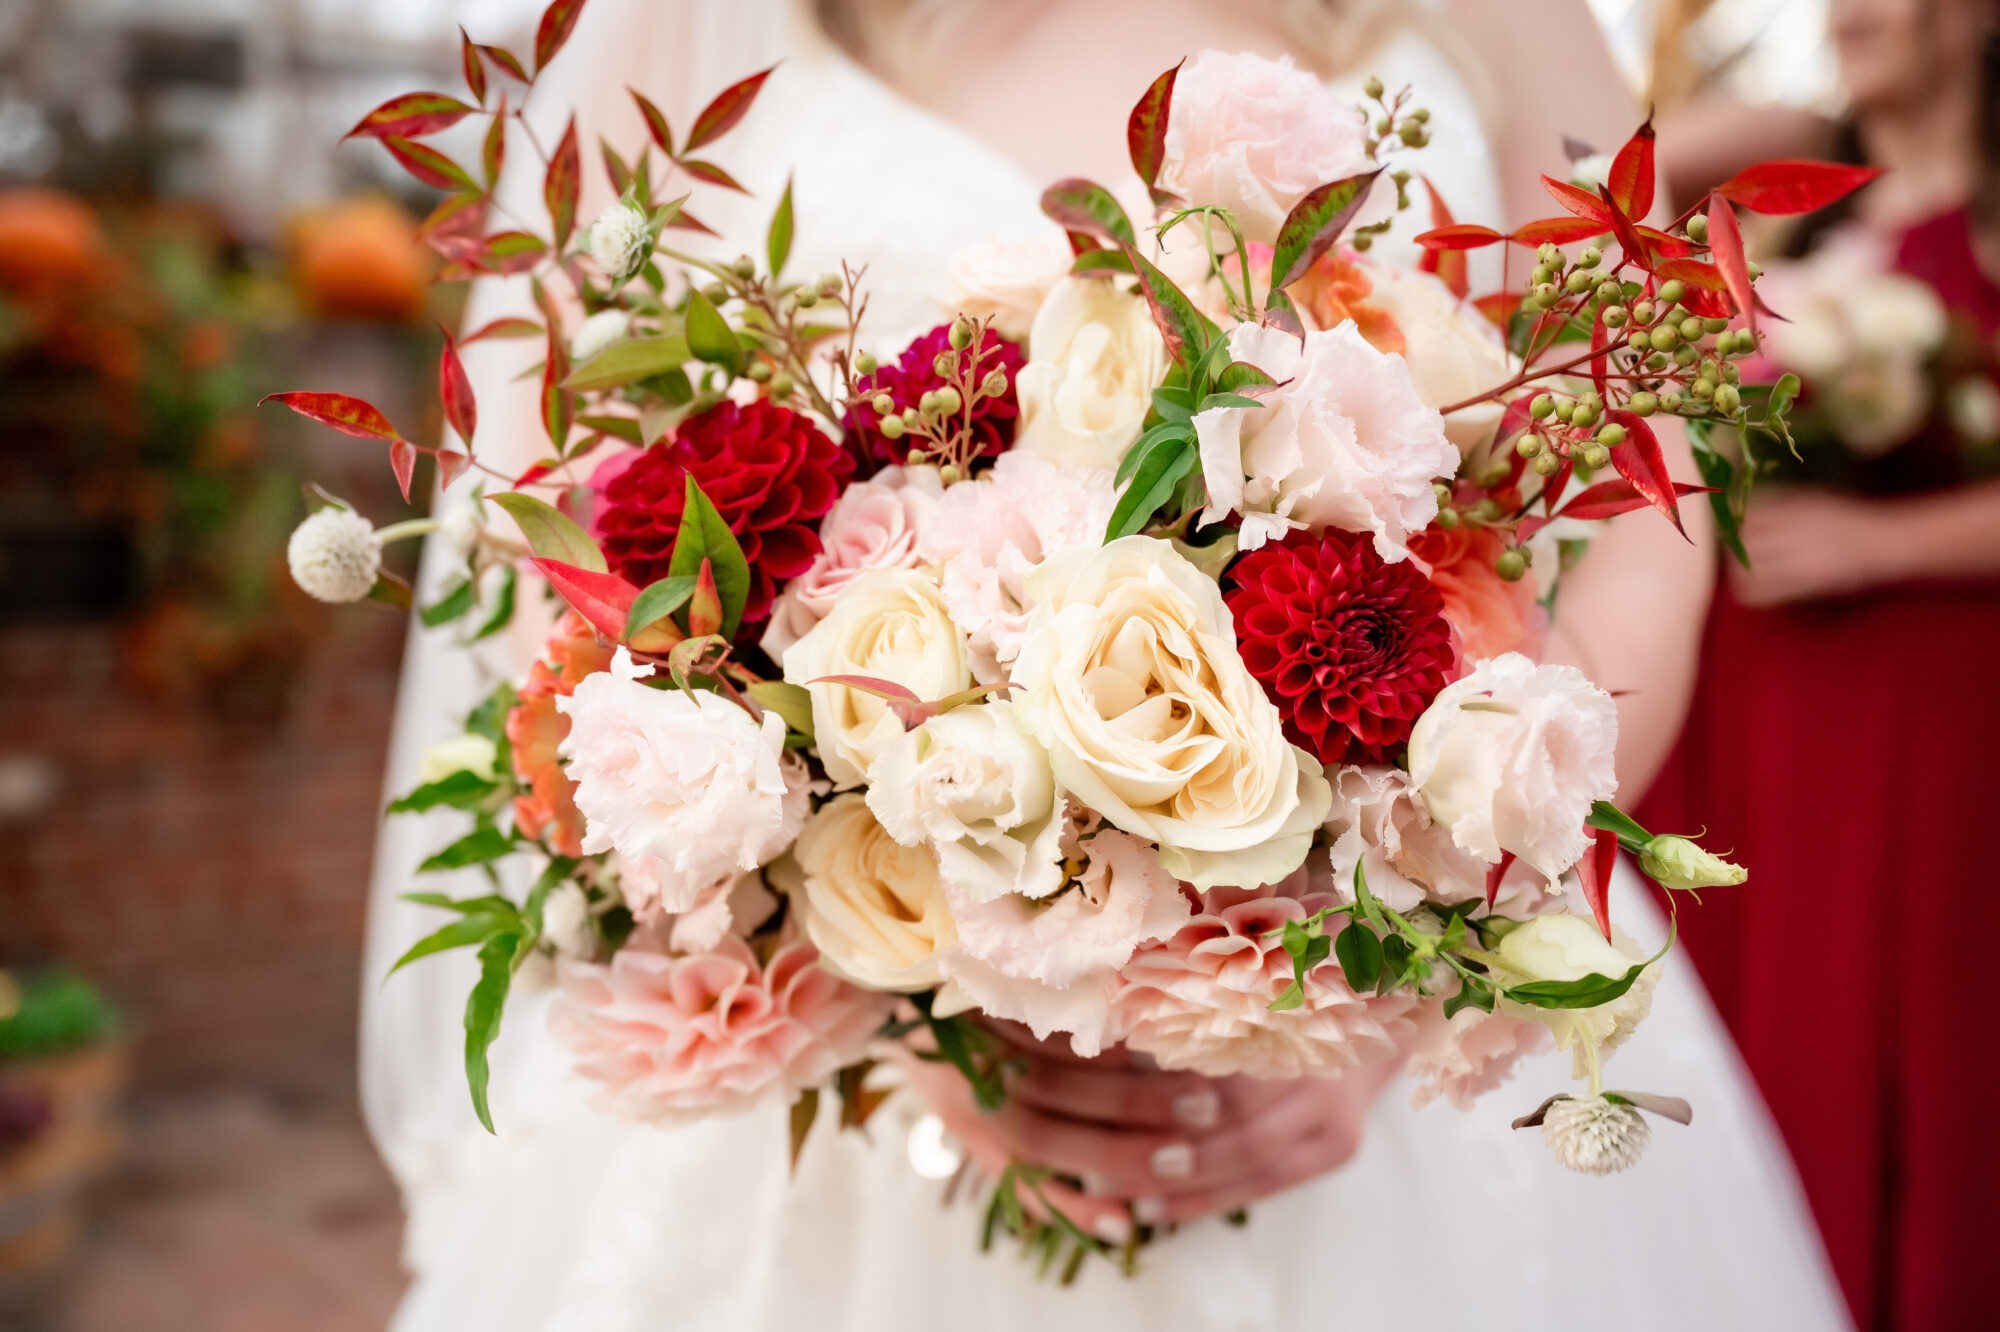 Pittsburgh florist Bramble & Blossom showcases a stunning arrangement of wedding flowers with a mix of vibrant blooms and delicate foliage. • Pittsburgh Wedding Florist - Bramble & Blossom Beautiful and Sustainable Flowers